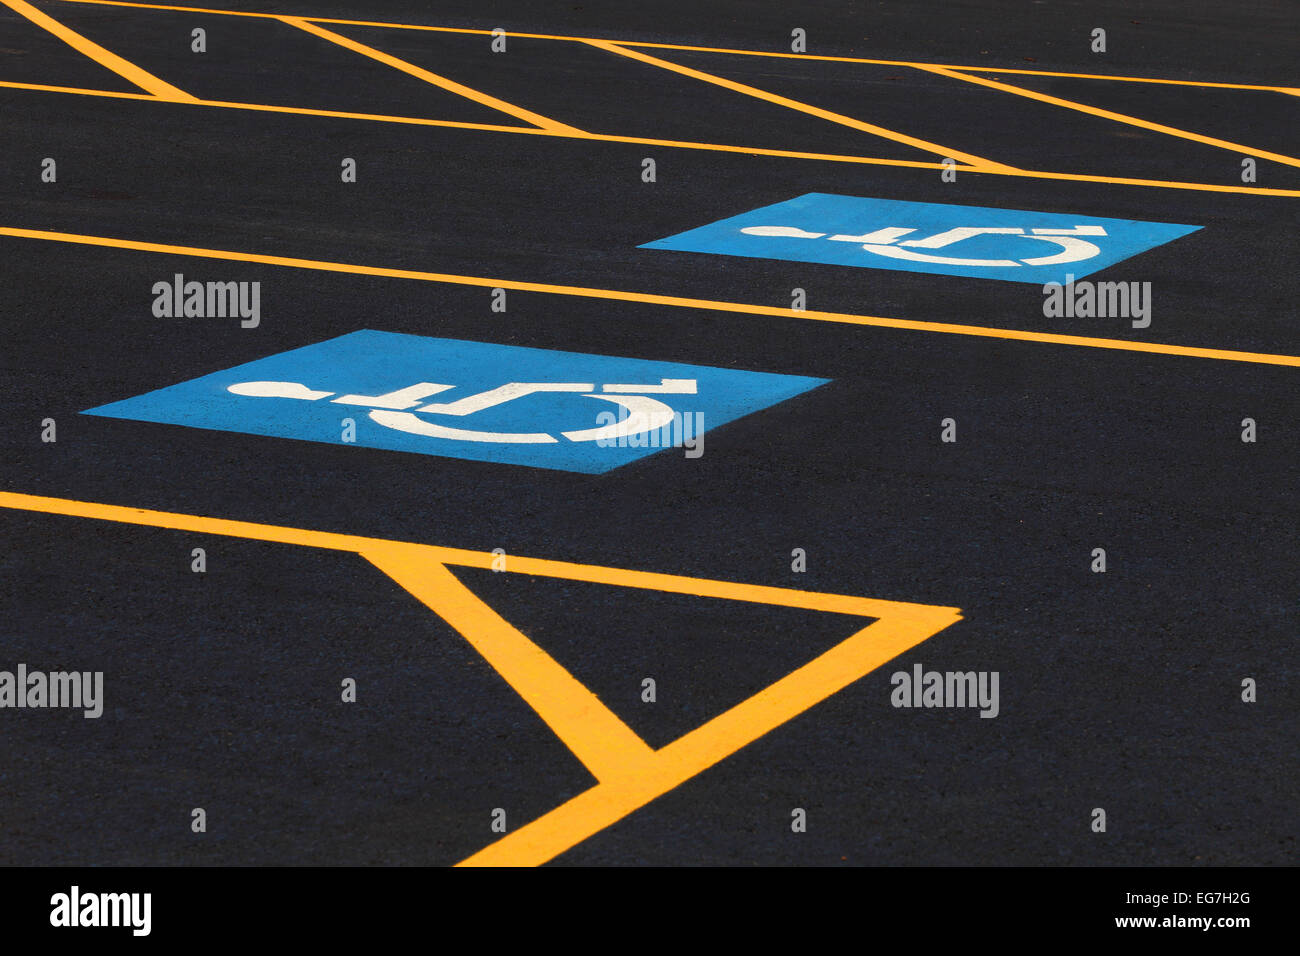 The international markings for a handicapped parking stall in a parking lot. Stock Photo